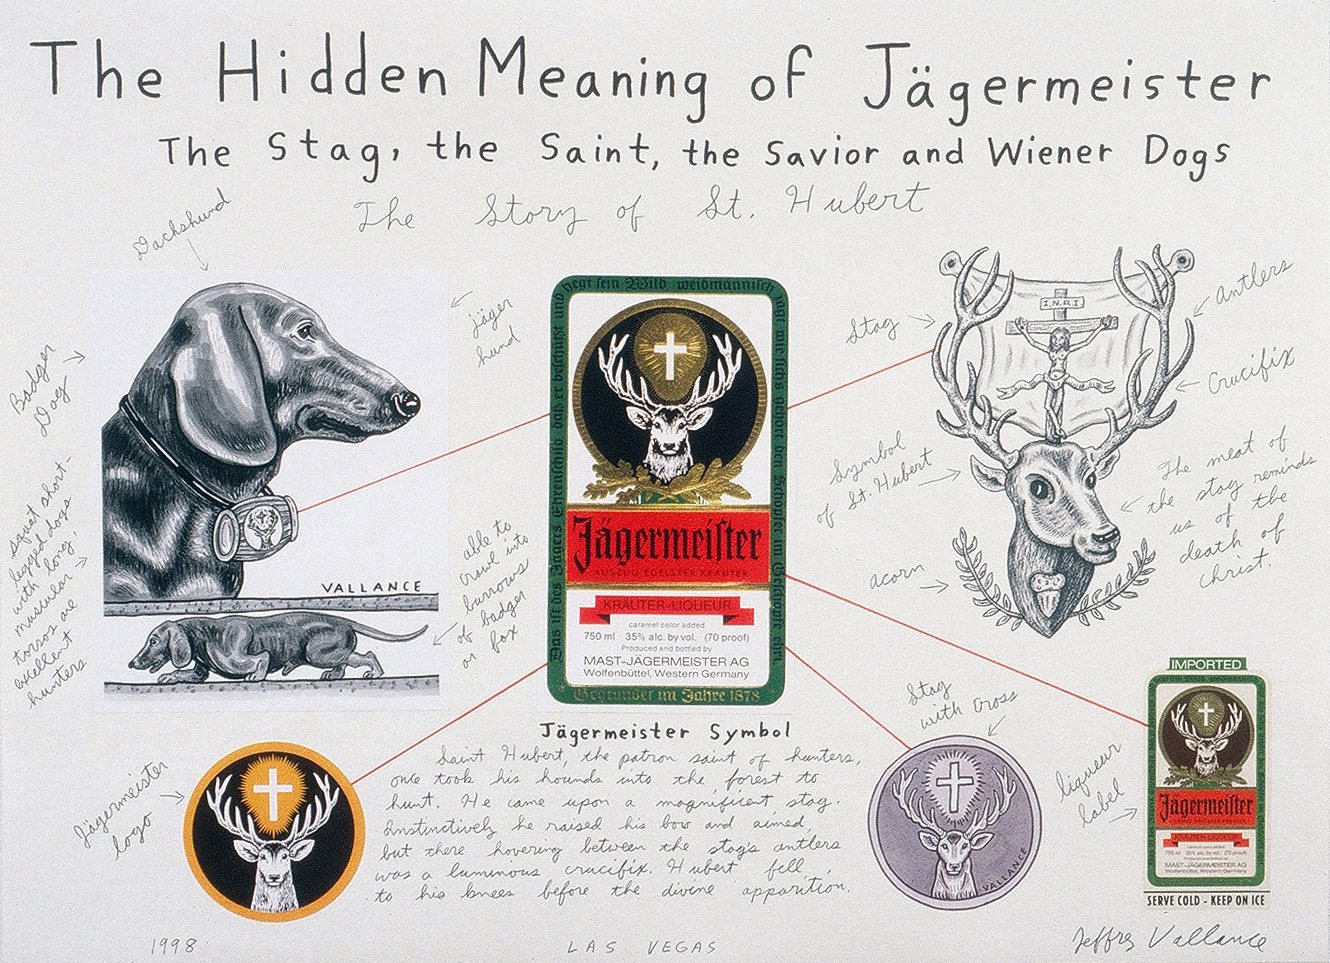 Jeffrey Vallance, <i>The Hidden Meaning of Jagermeister The Stag, the Saint, the Savior, and Wiener Dogs</i>, 1998. Mixed media on paper, 22 x 30 inches.